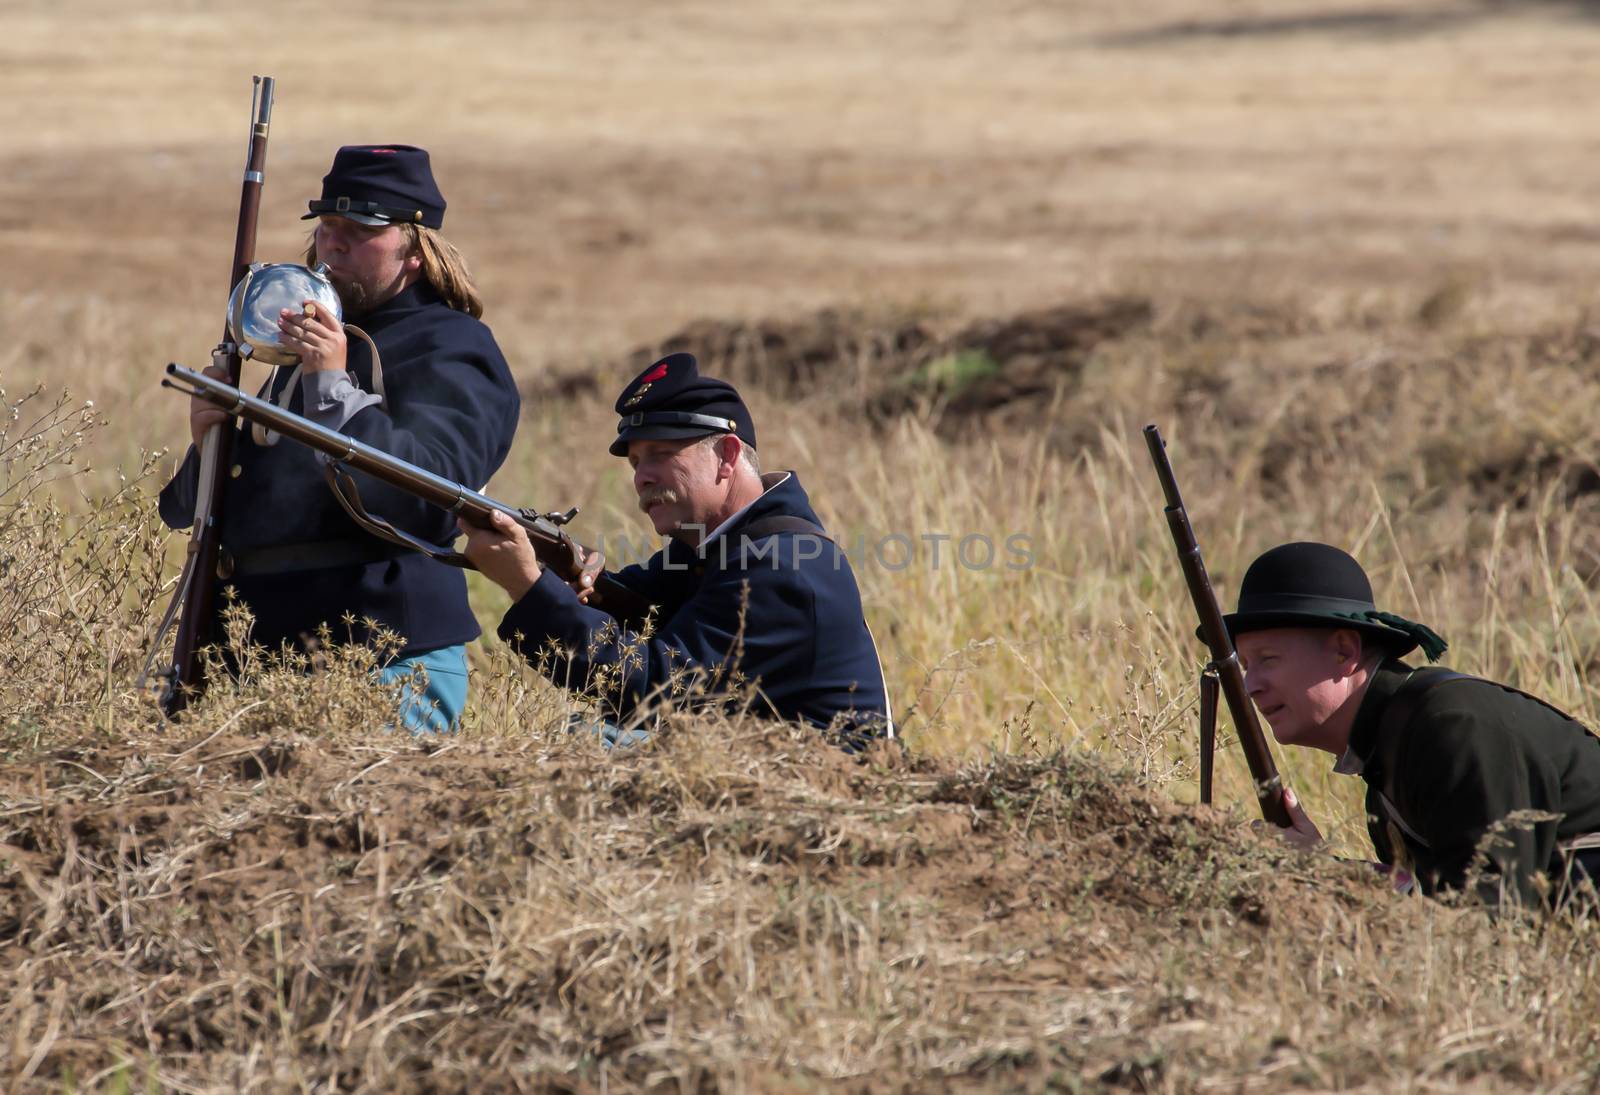 A union sniper takes aim at a target during a Civil War Reenactment at Anderson, California.
Photo taken on: September 27th, 2014